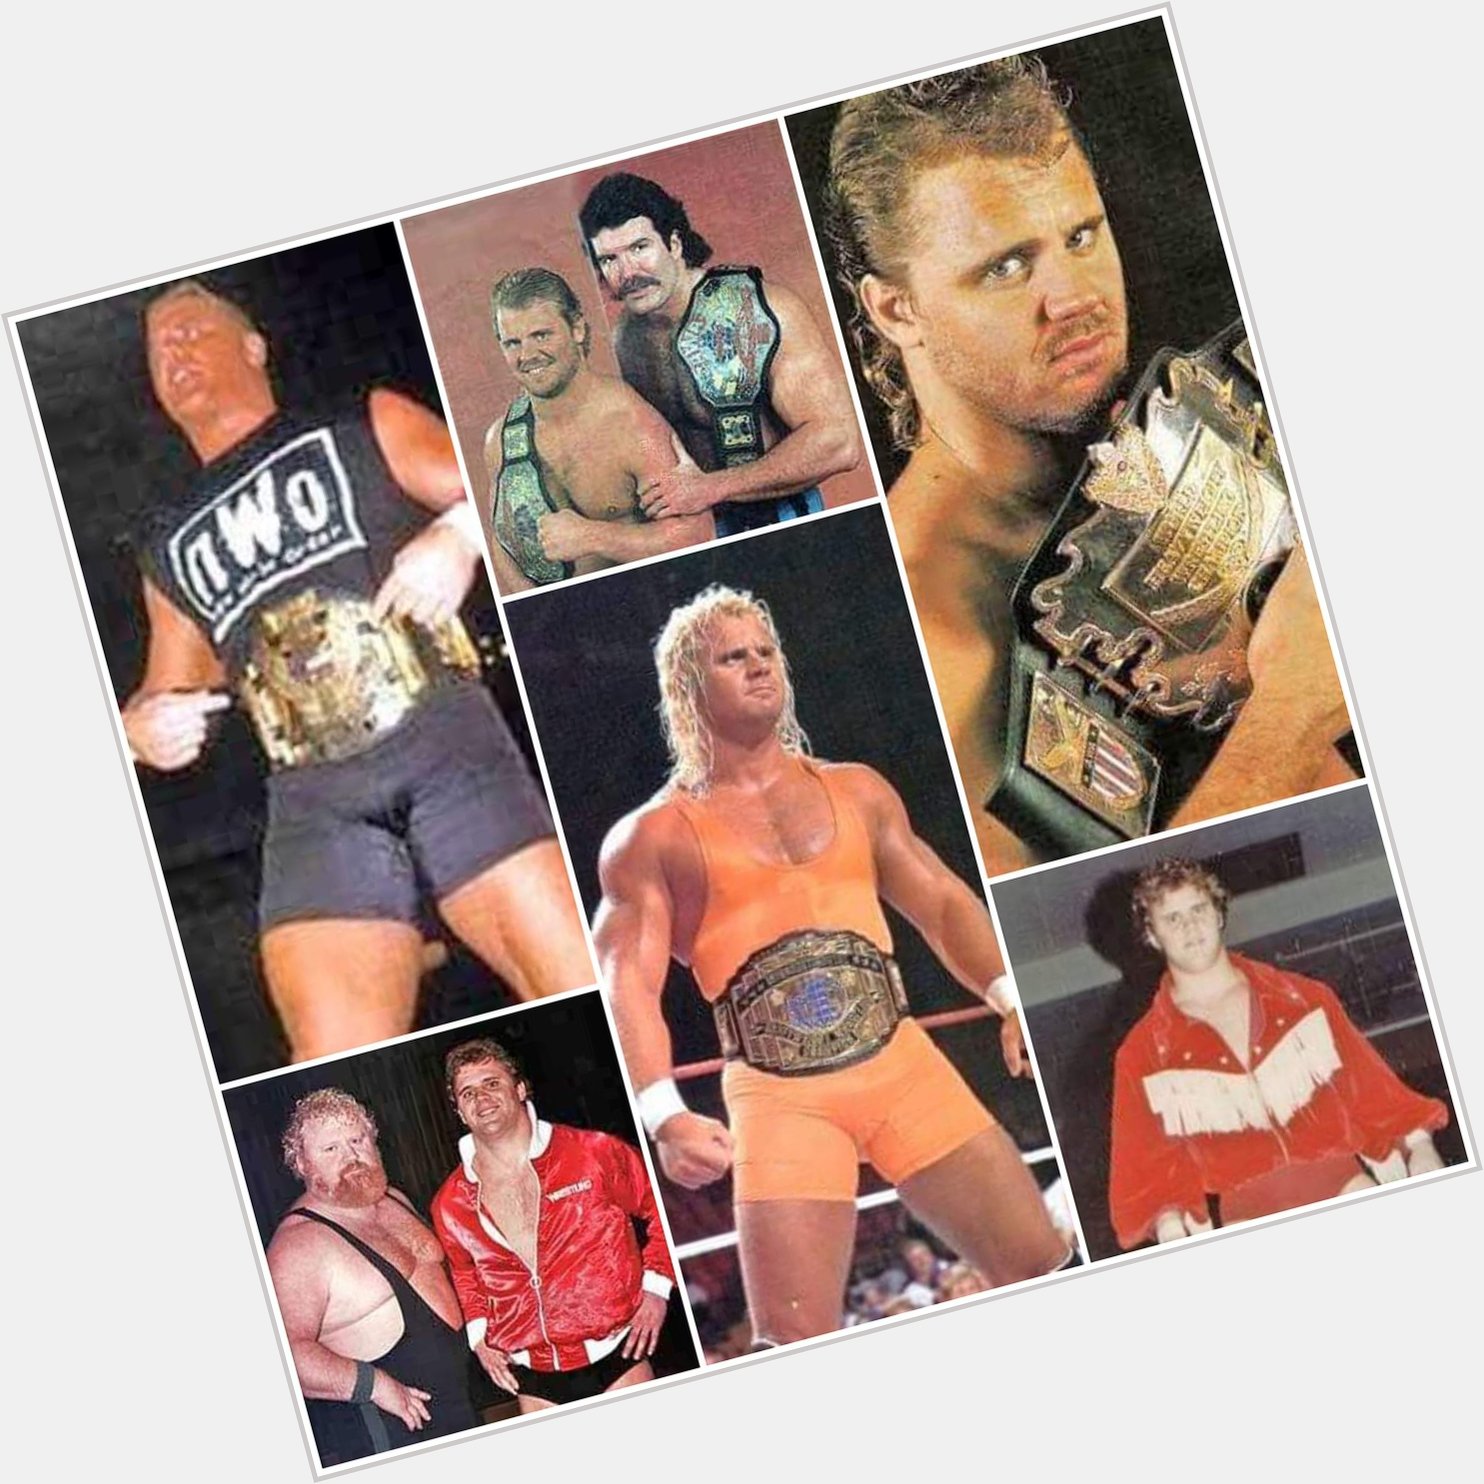 Happy birthday, Curt Hennig! He would have been 61 years old today.  